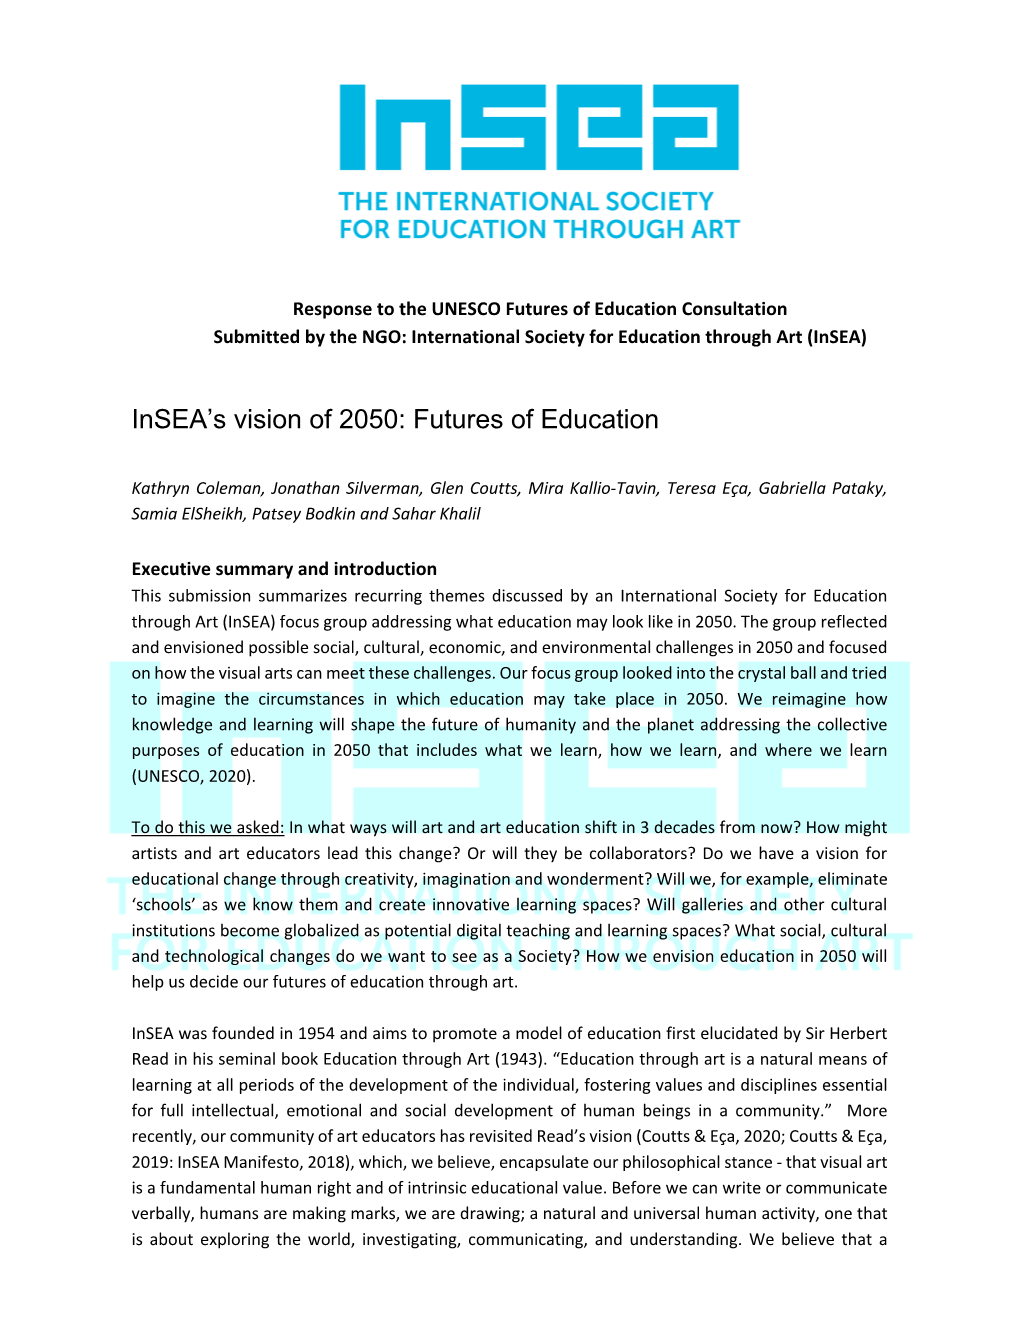 Response to the UNESCO Futures of Education Consultation Submitted by the NGO: International Society for Education Through Art (Insea)